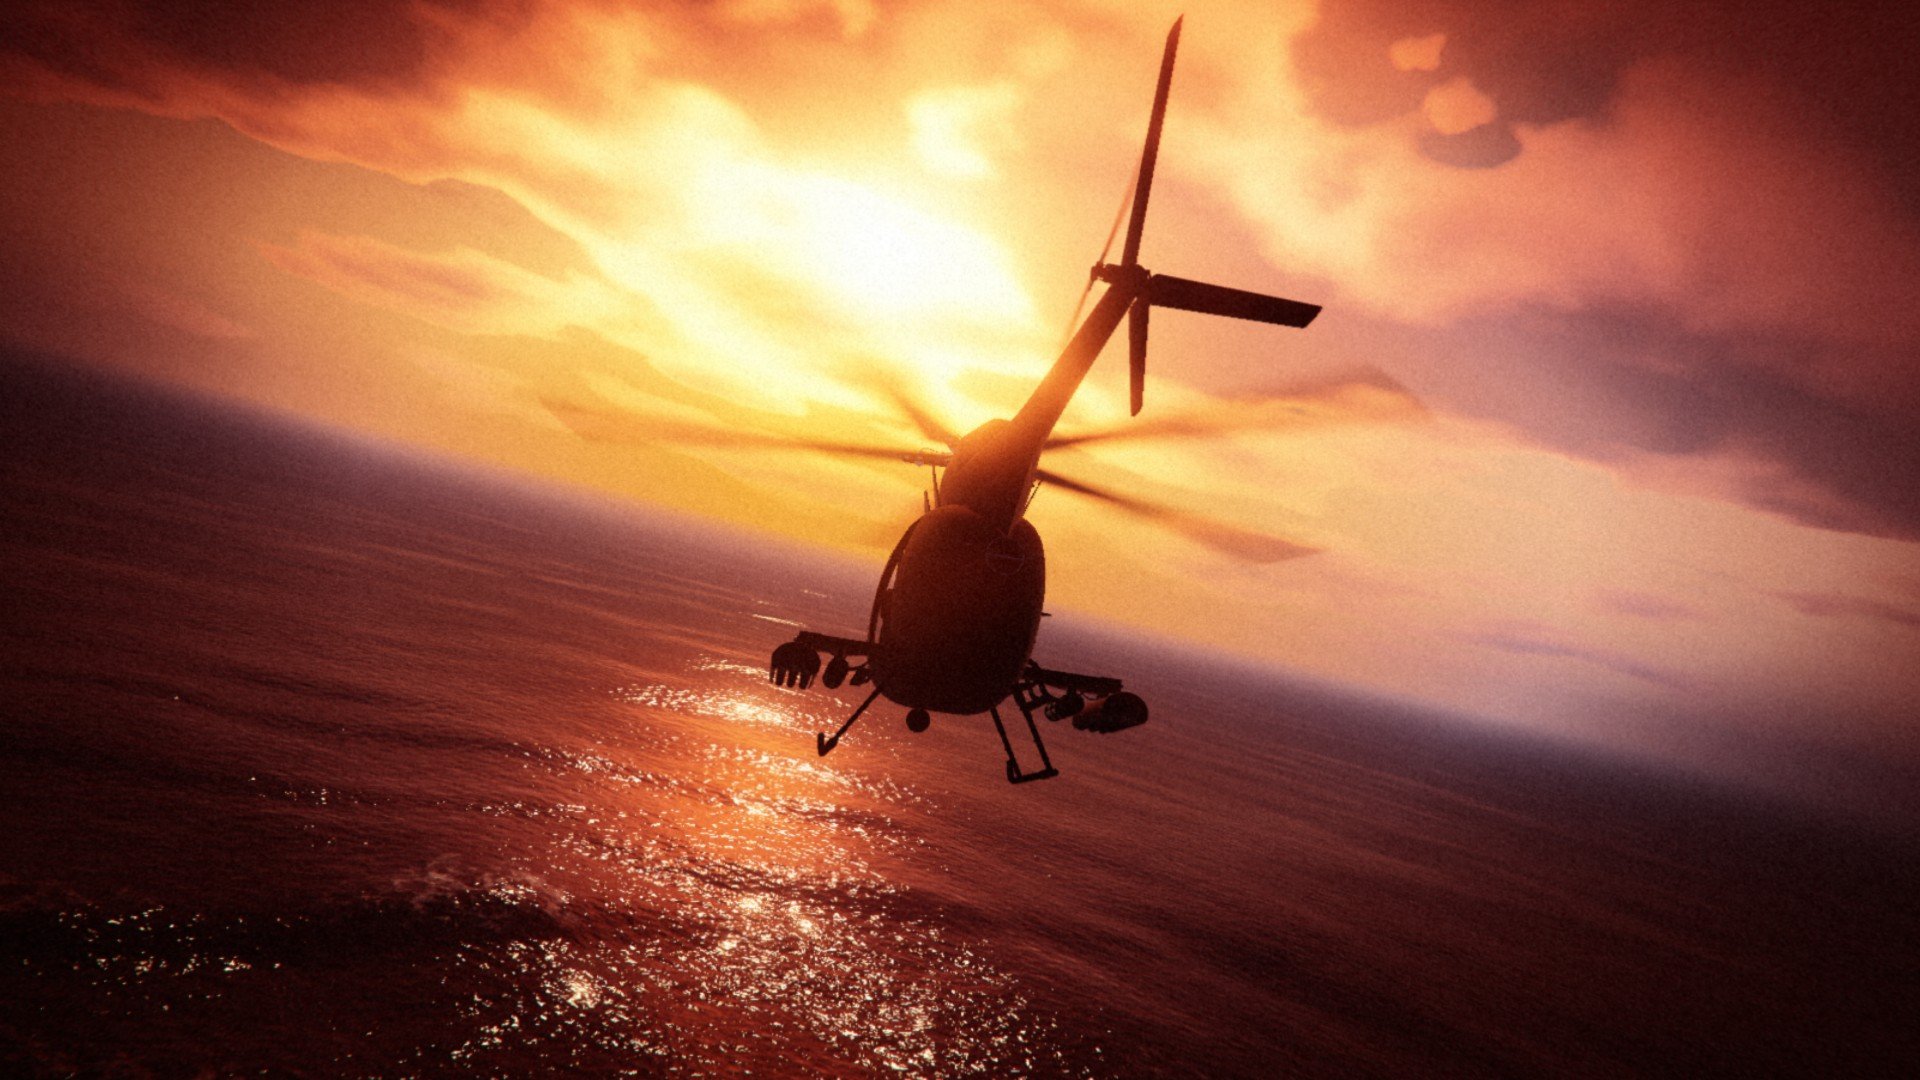 Grand Theft Auto V, Grand Theft Auto Online, Rockstar Games, Helicopters, Pacific Ocean, Sunset Wallpaper